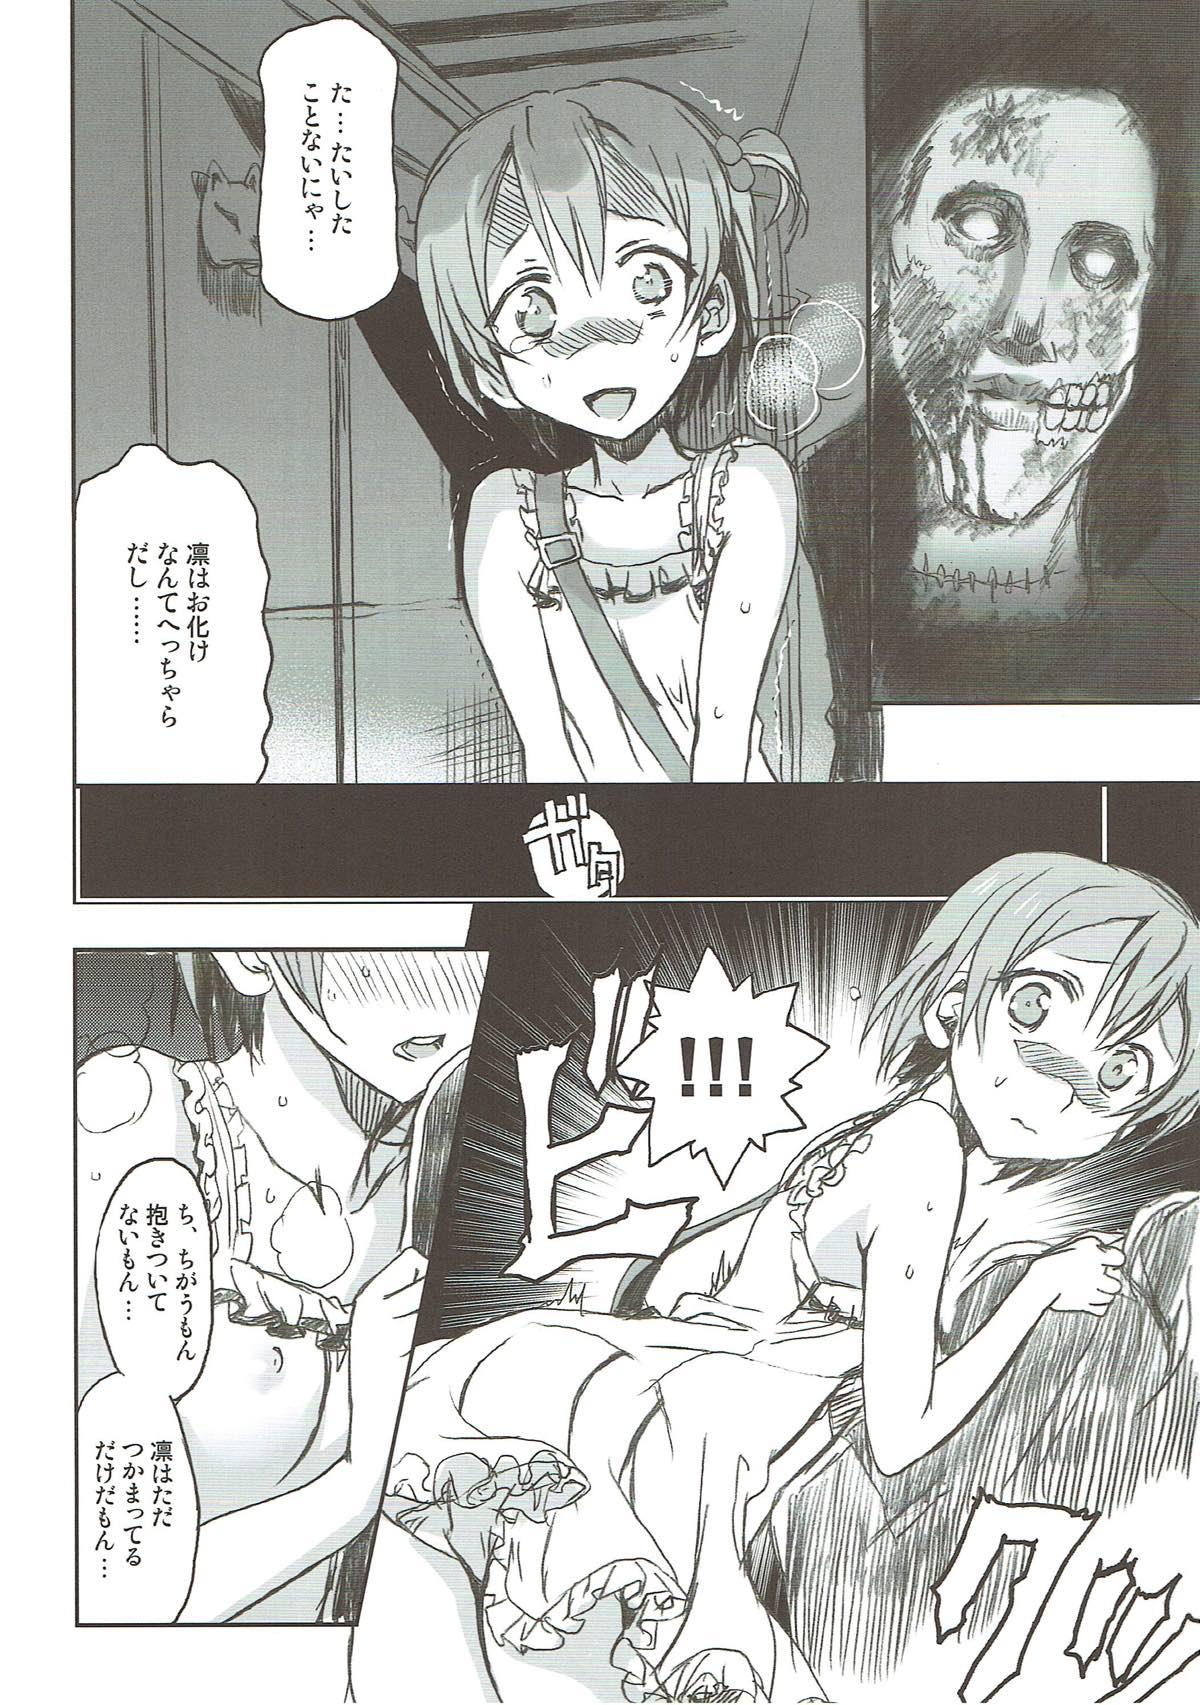 Audition Hoshisora Kanojo. - Love live Lolicon - Page 11